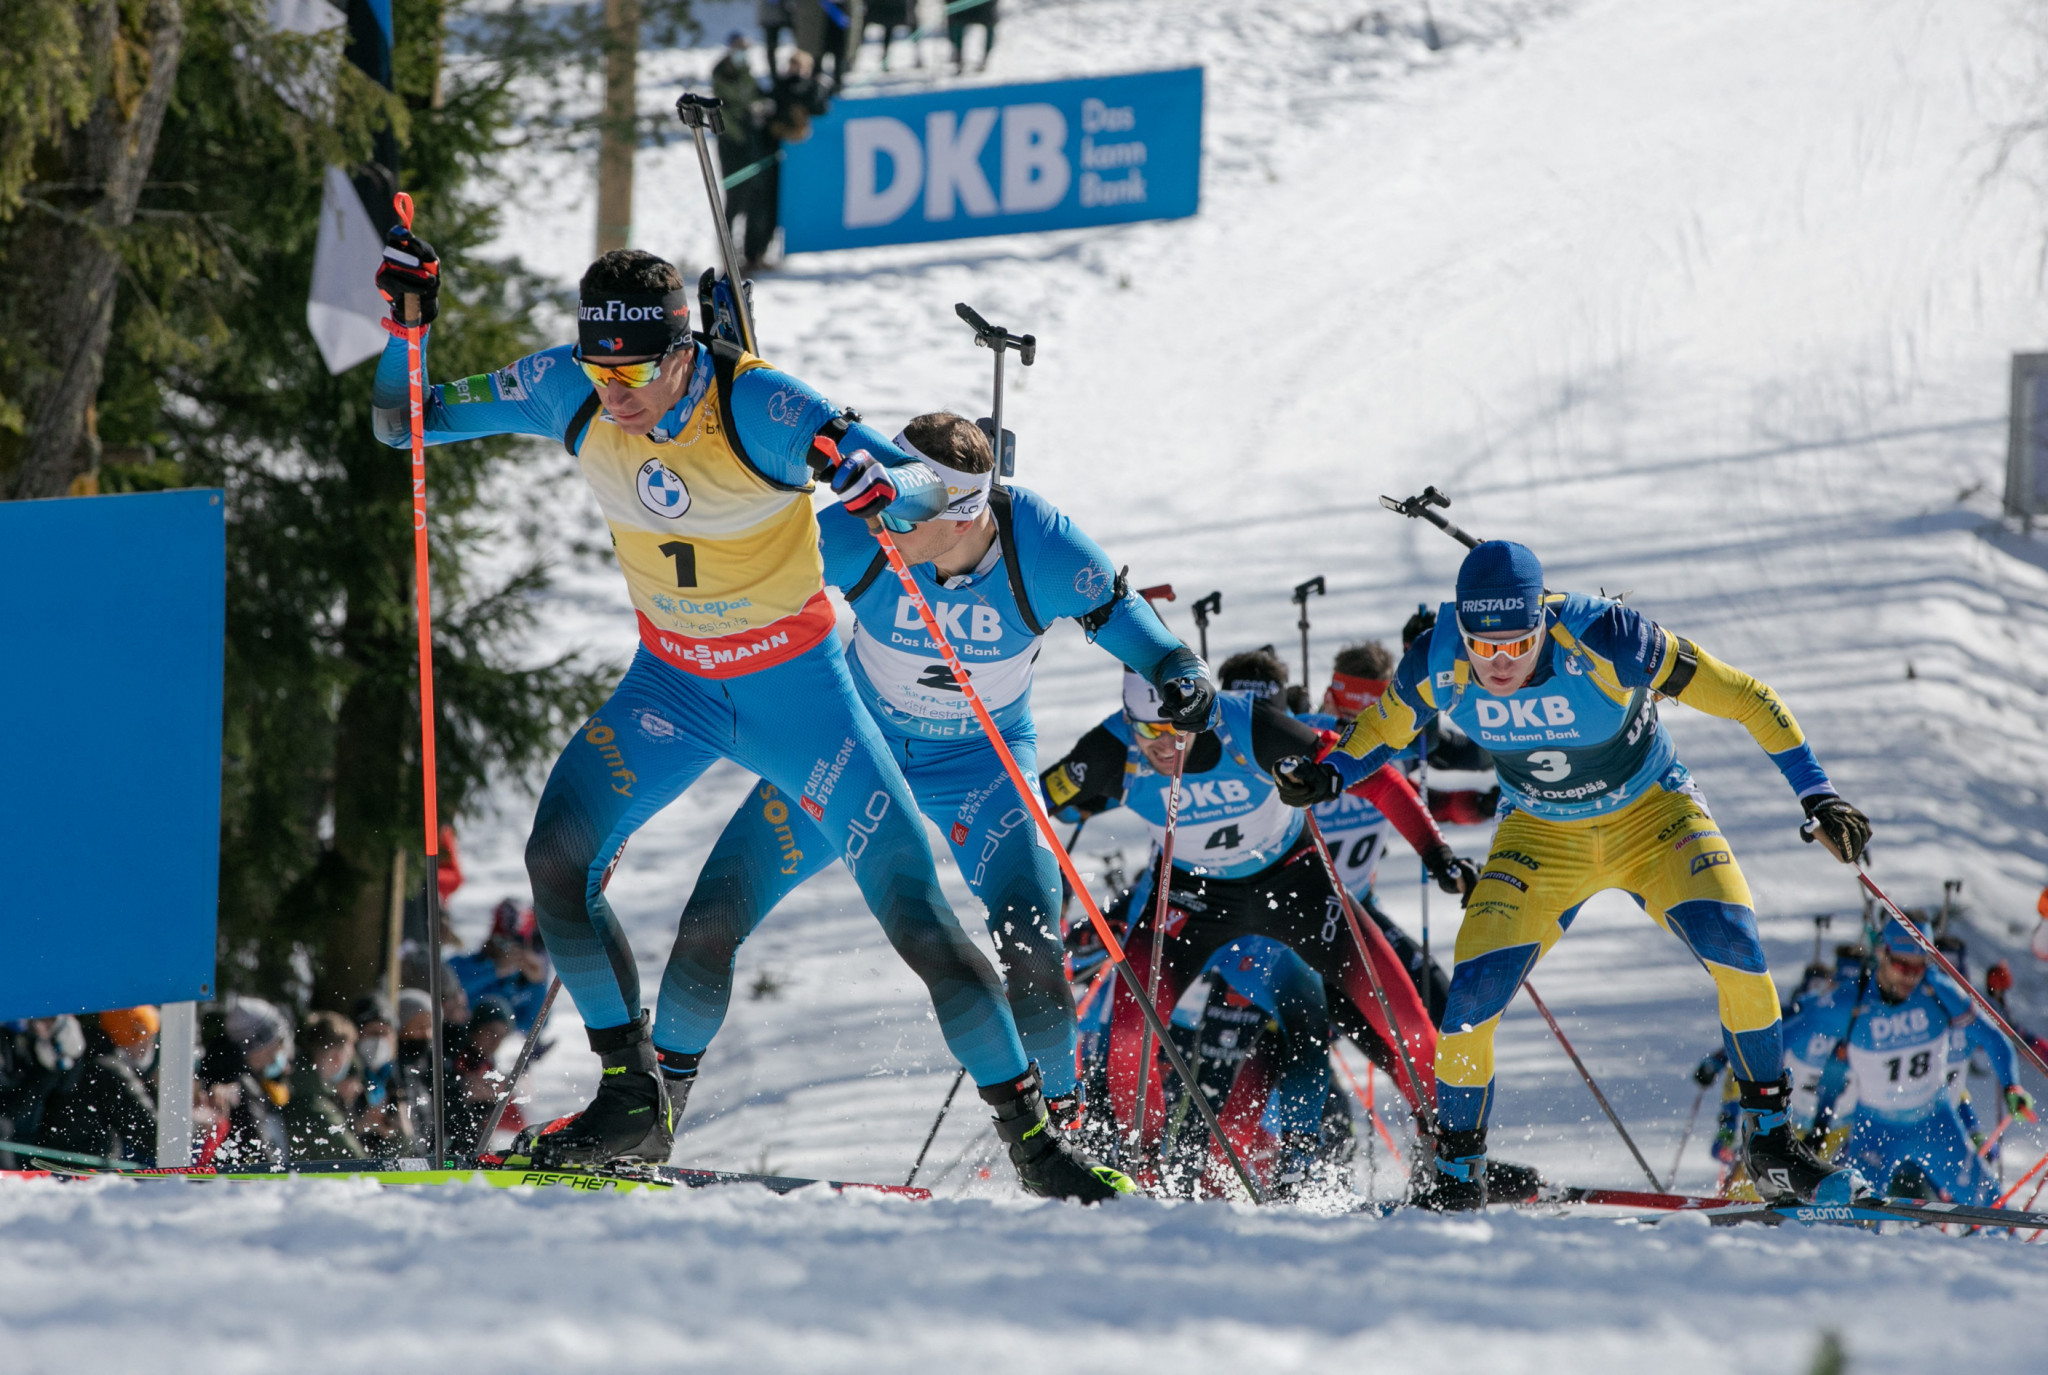 Fillon Maillet clinches overall Biathlon World Cup men's title as Öberg keeps hopes alive in women's